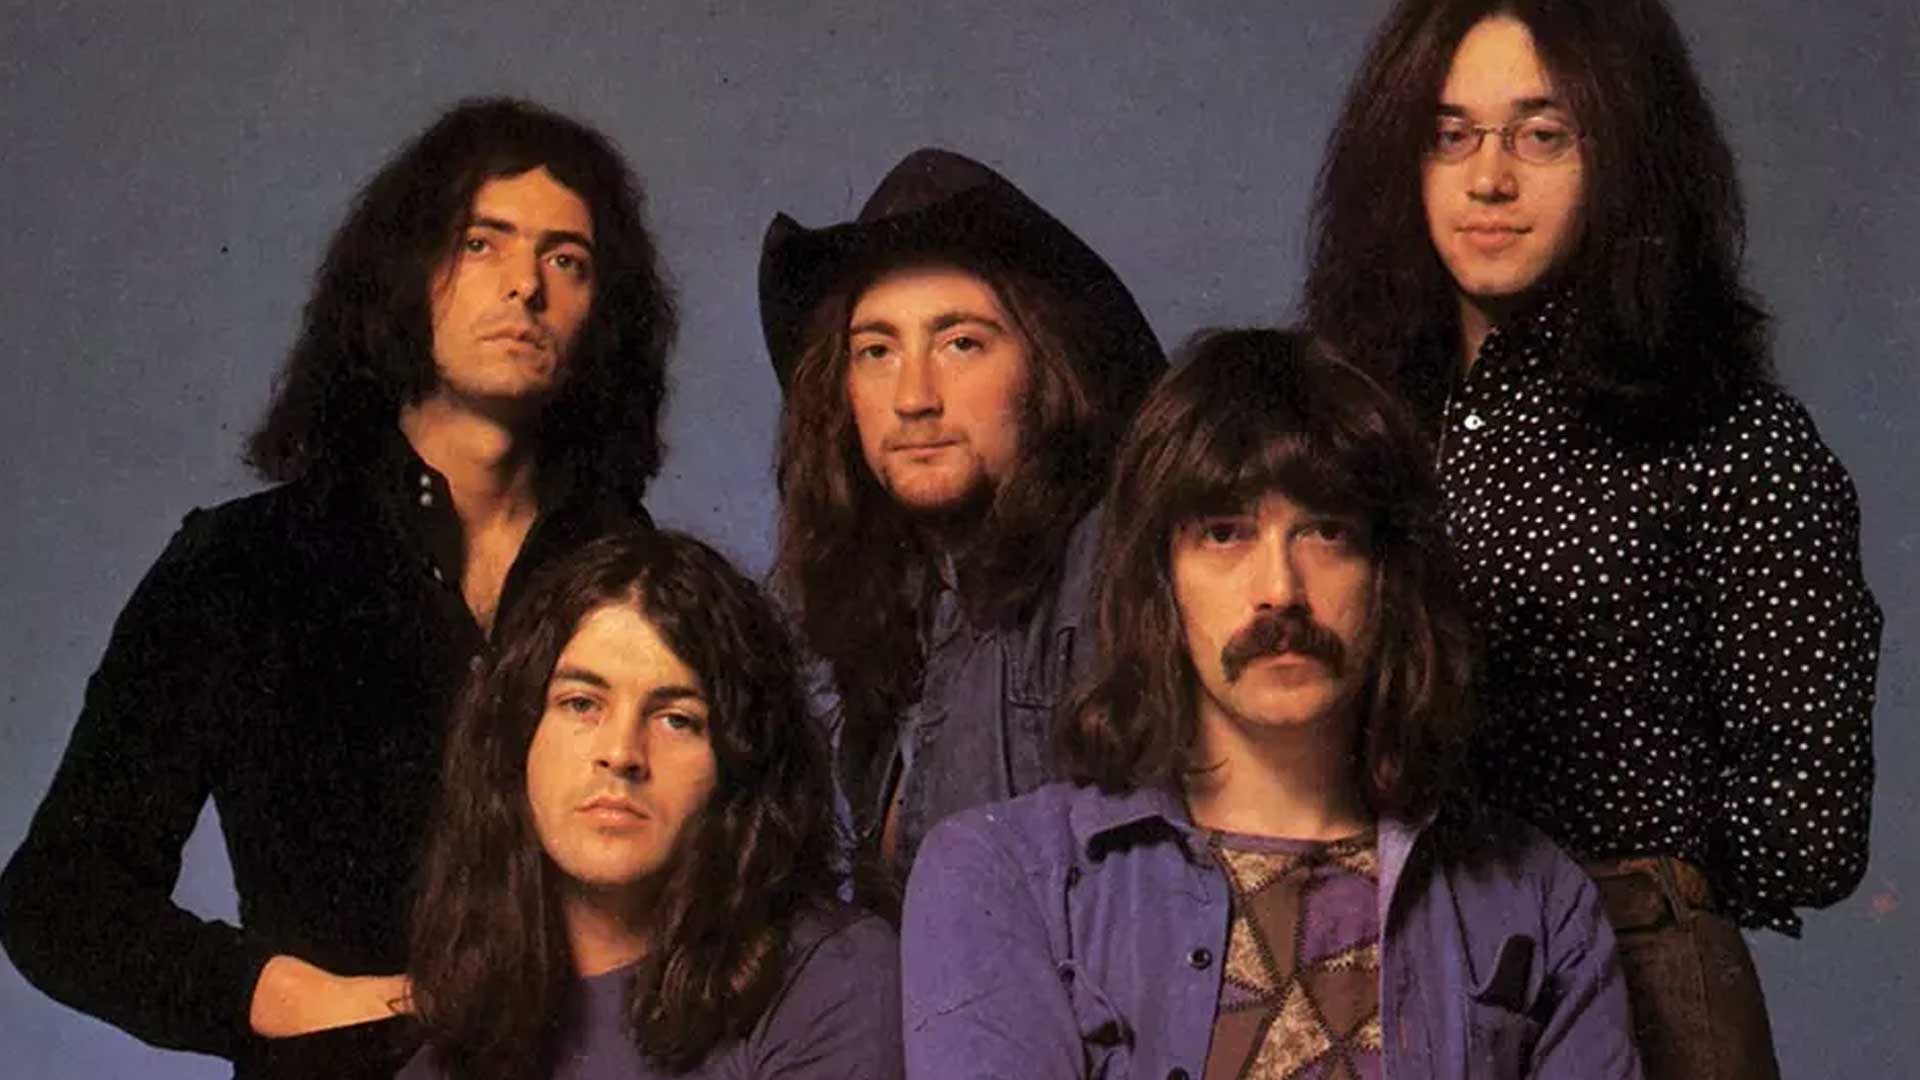 A classic rock band in the 1970s